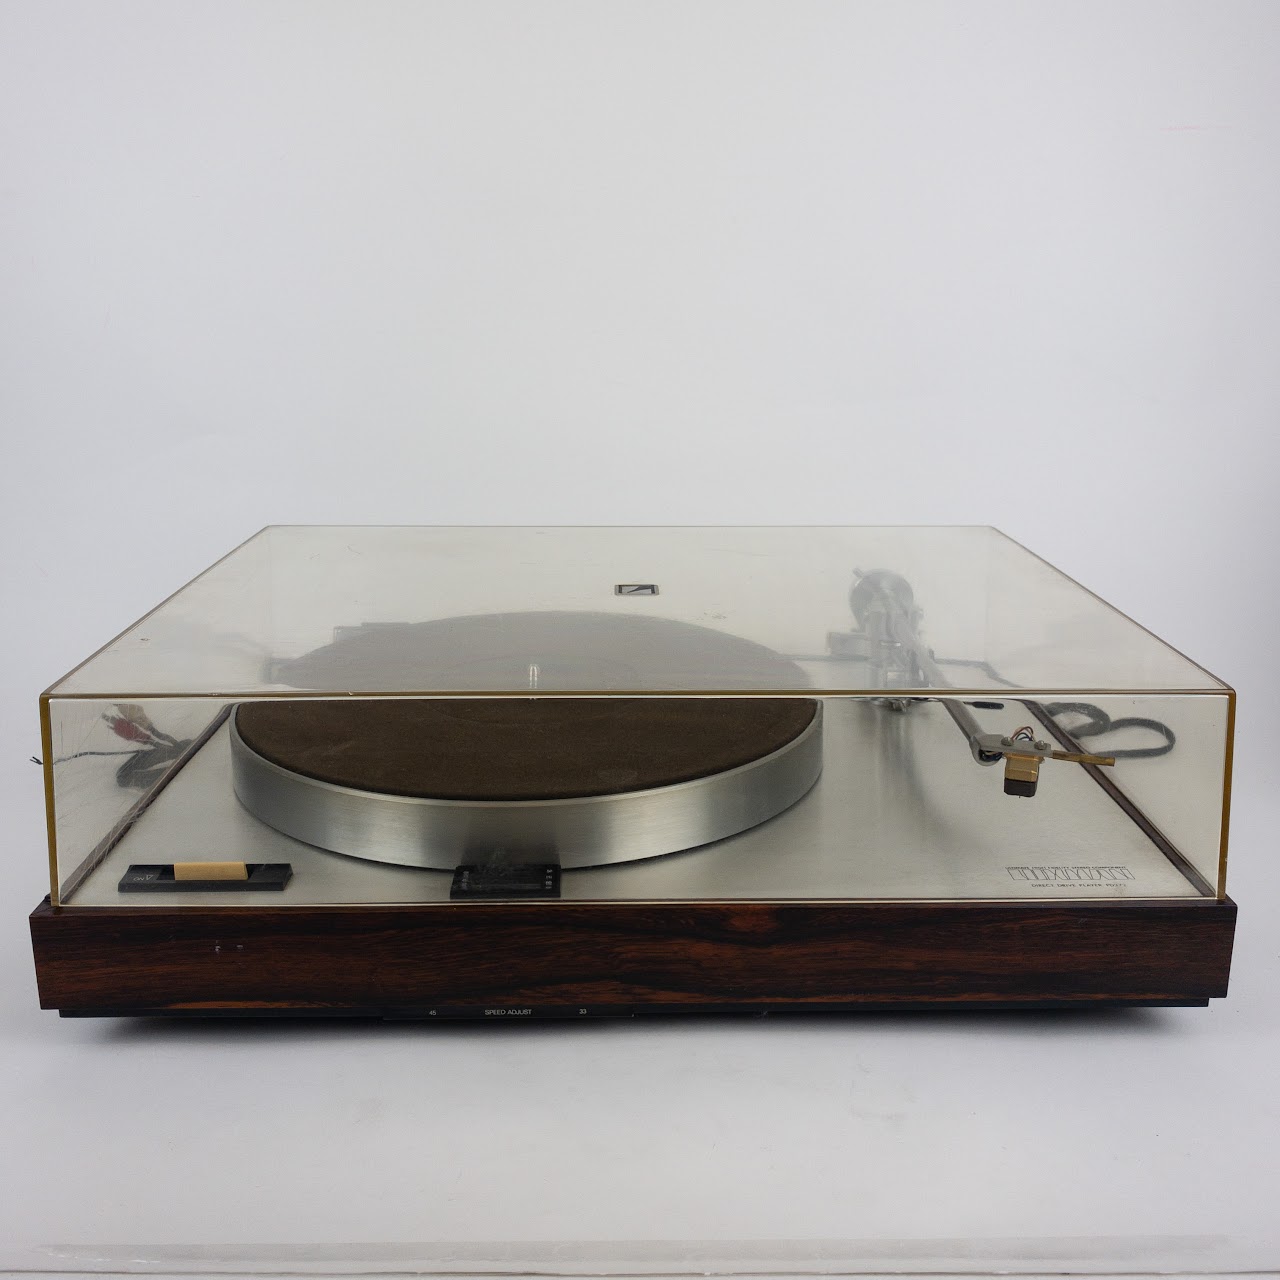 Luxman PD-272 Direct Drive Turntable